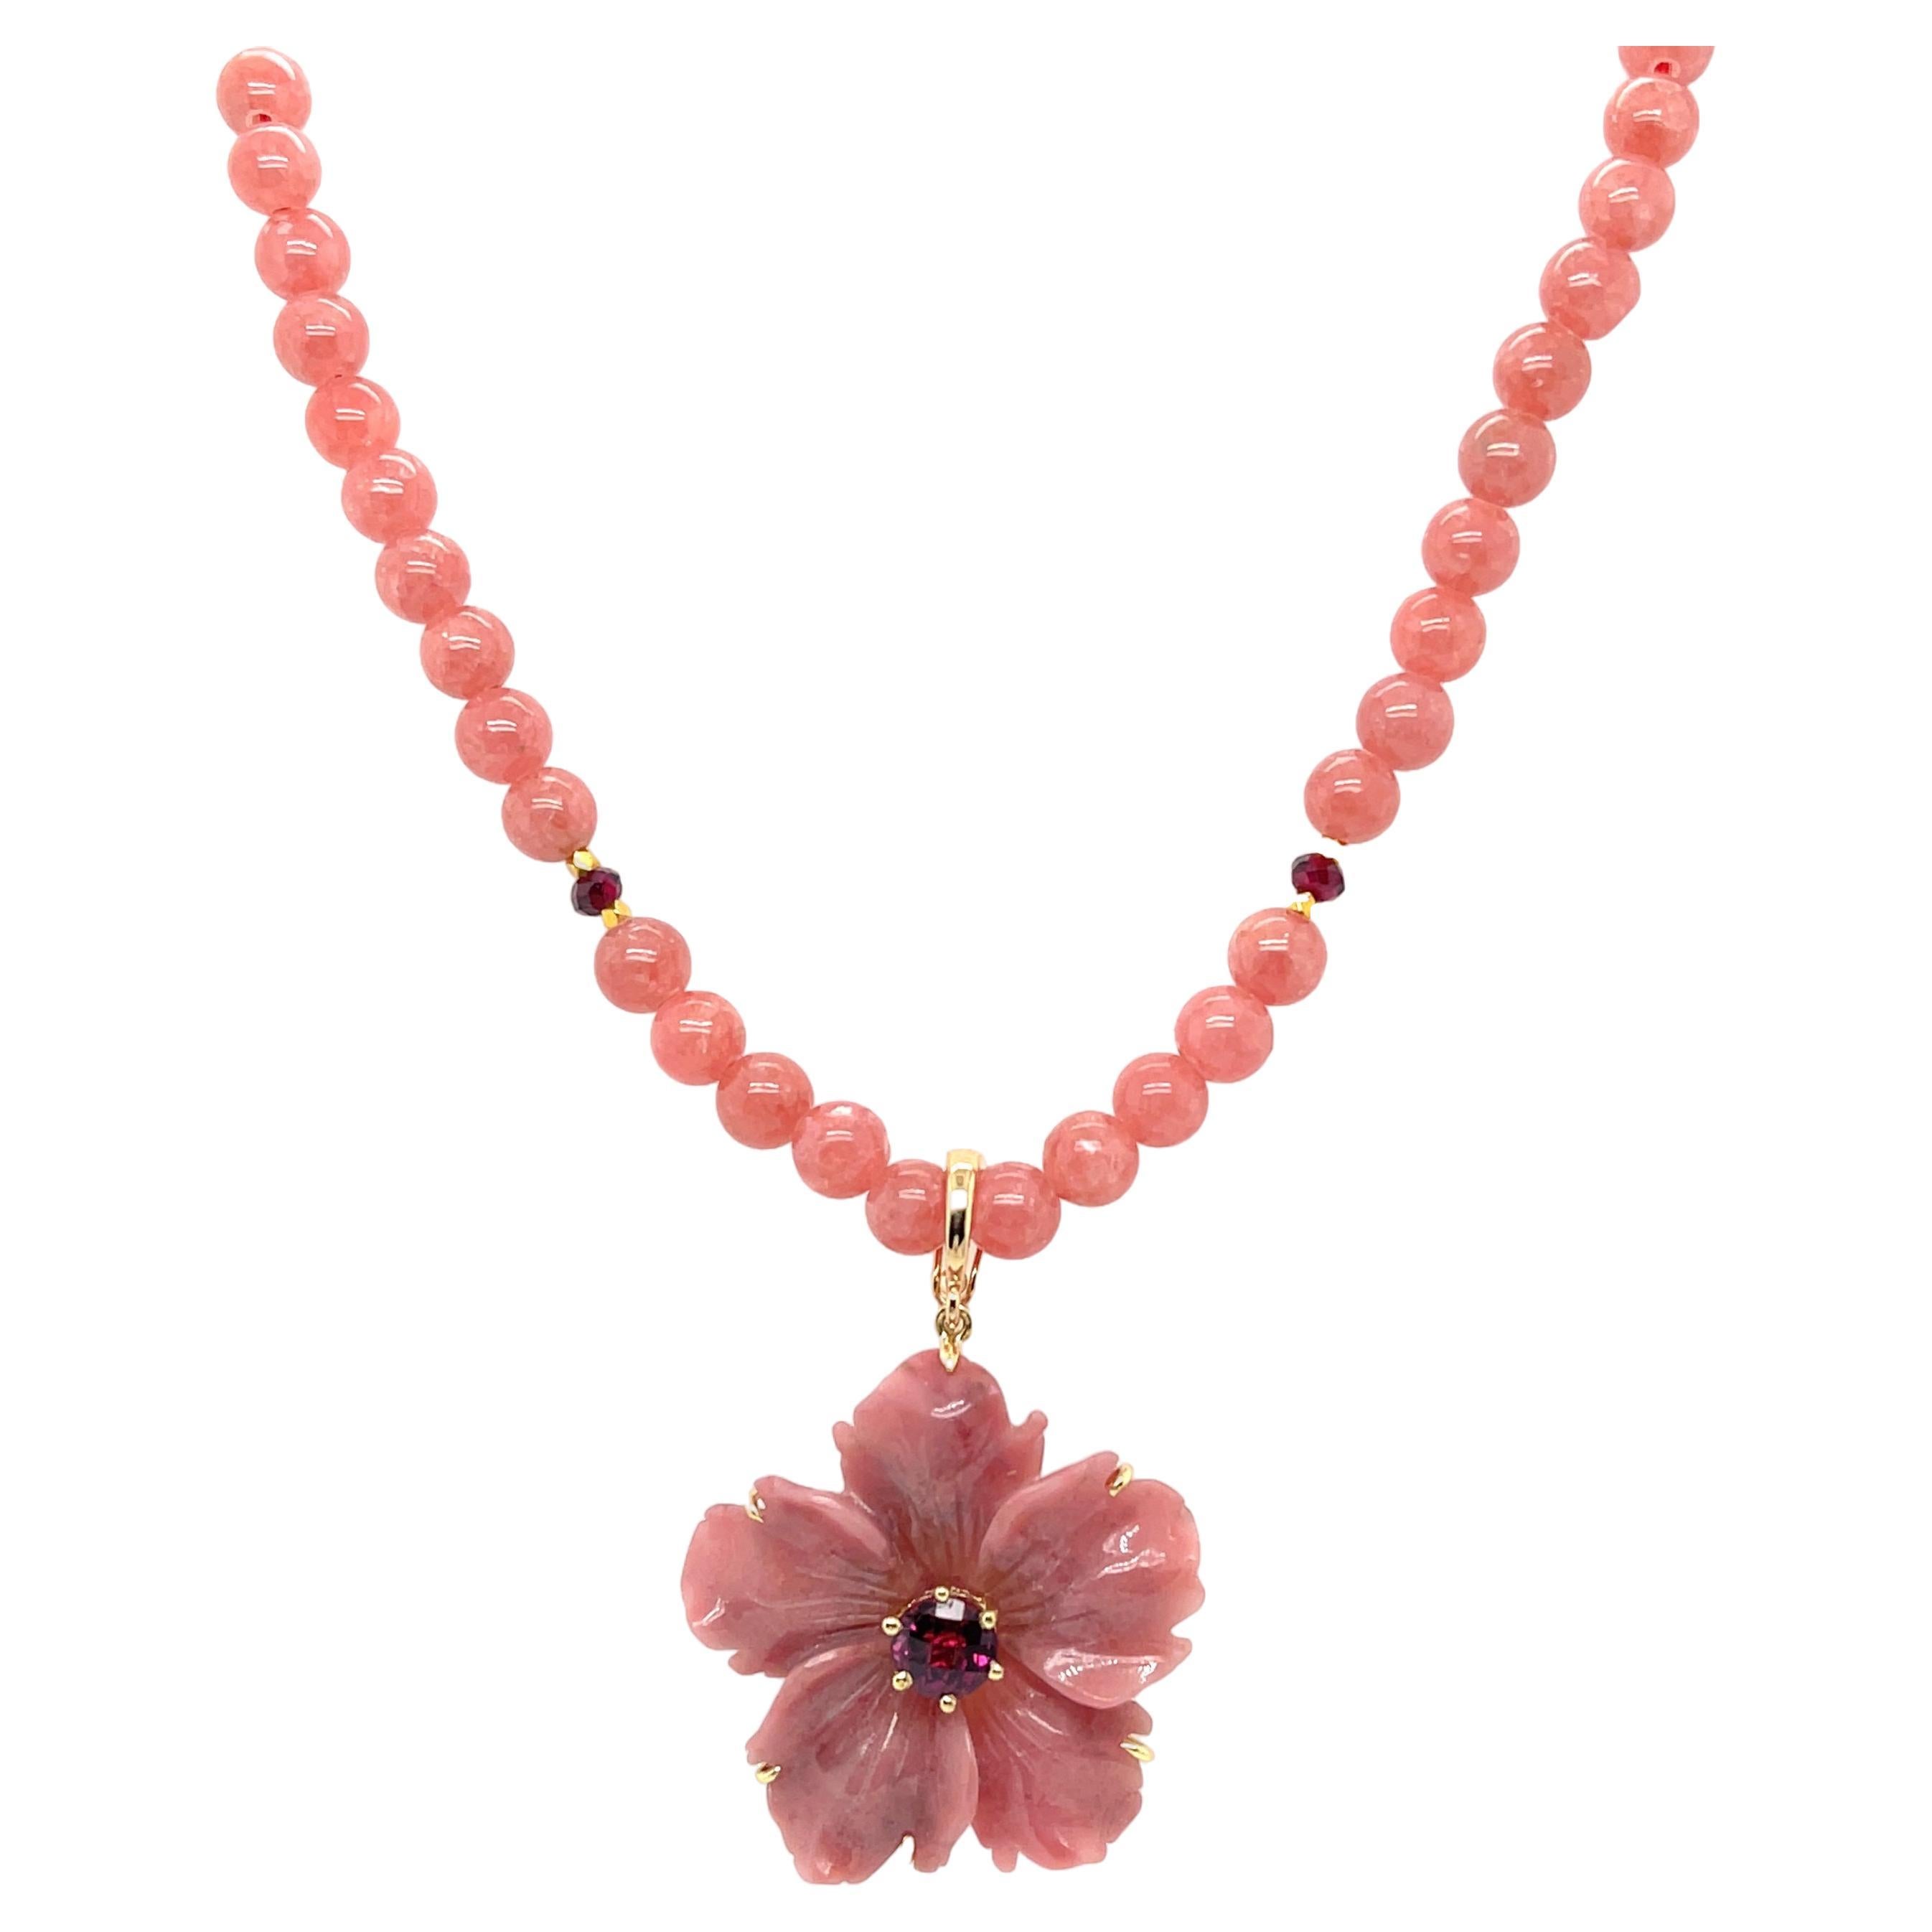  Rhodochrosite Beaded Necklace with Hand Carved Rhodonite Floral Pendant  For Sale